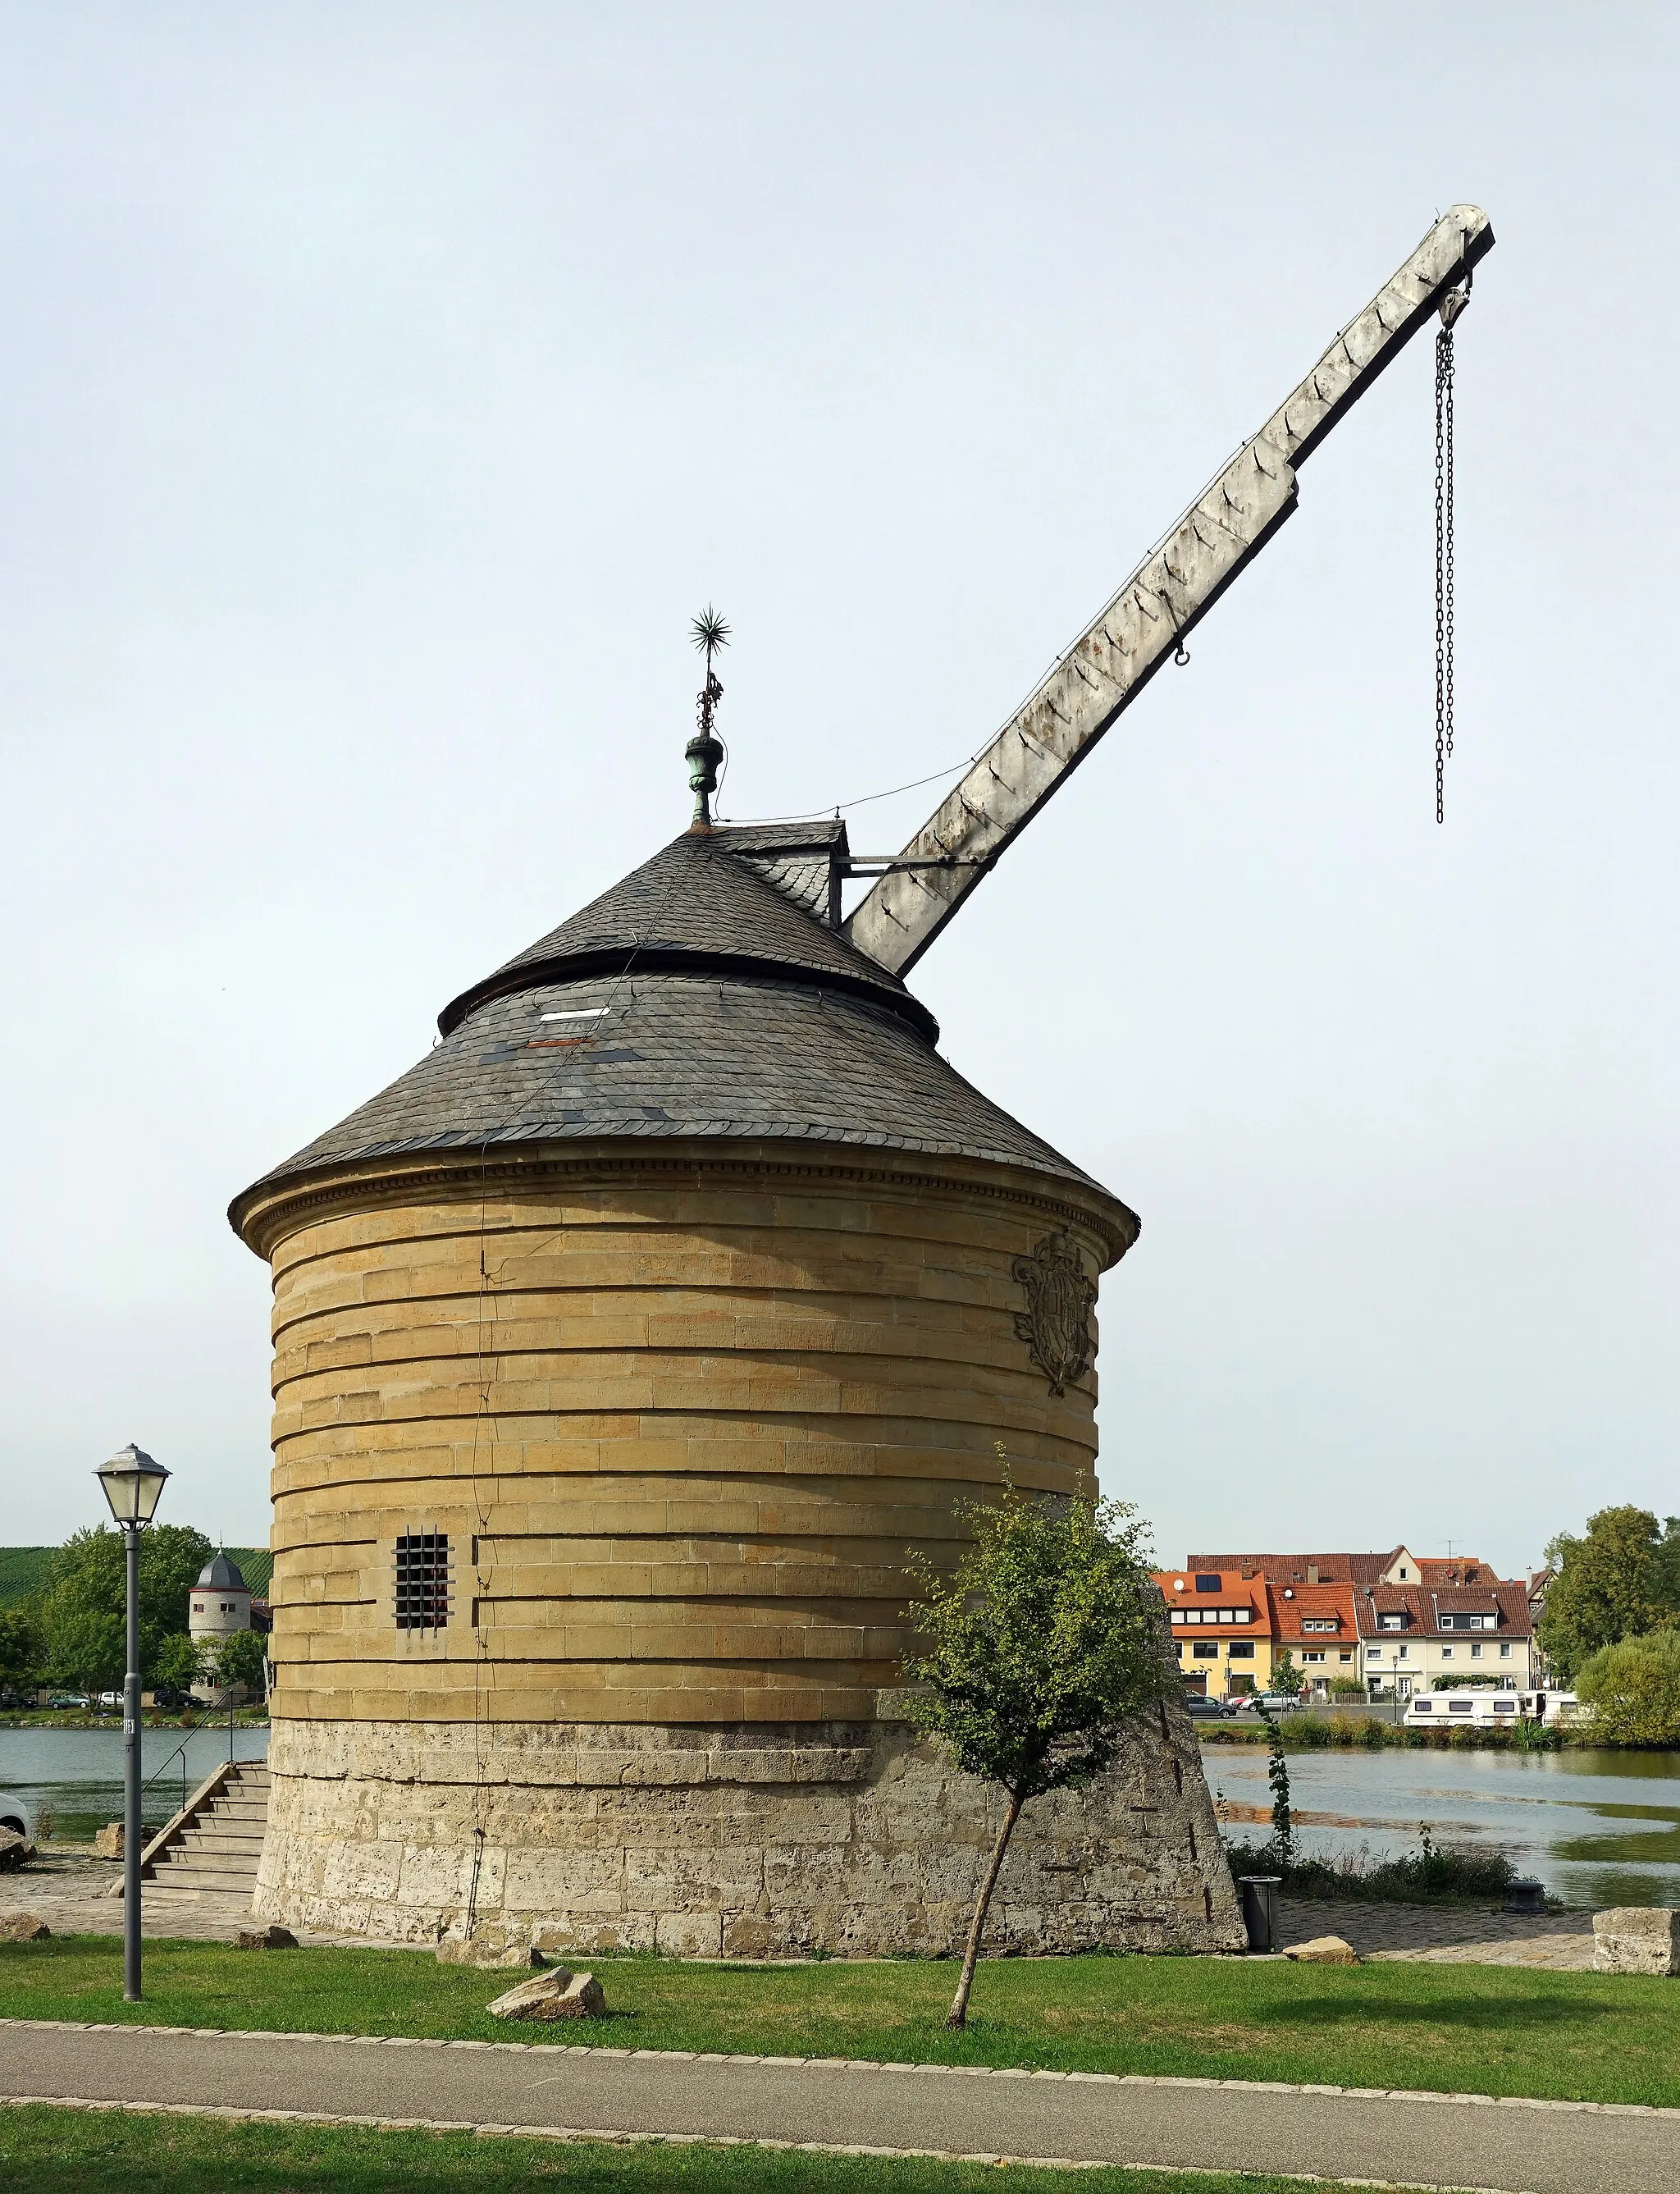 Photo showing: A treadwheel crane at the riverside of Marktbreit, preserved as cultural heritage.